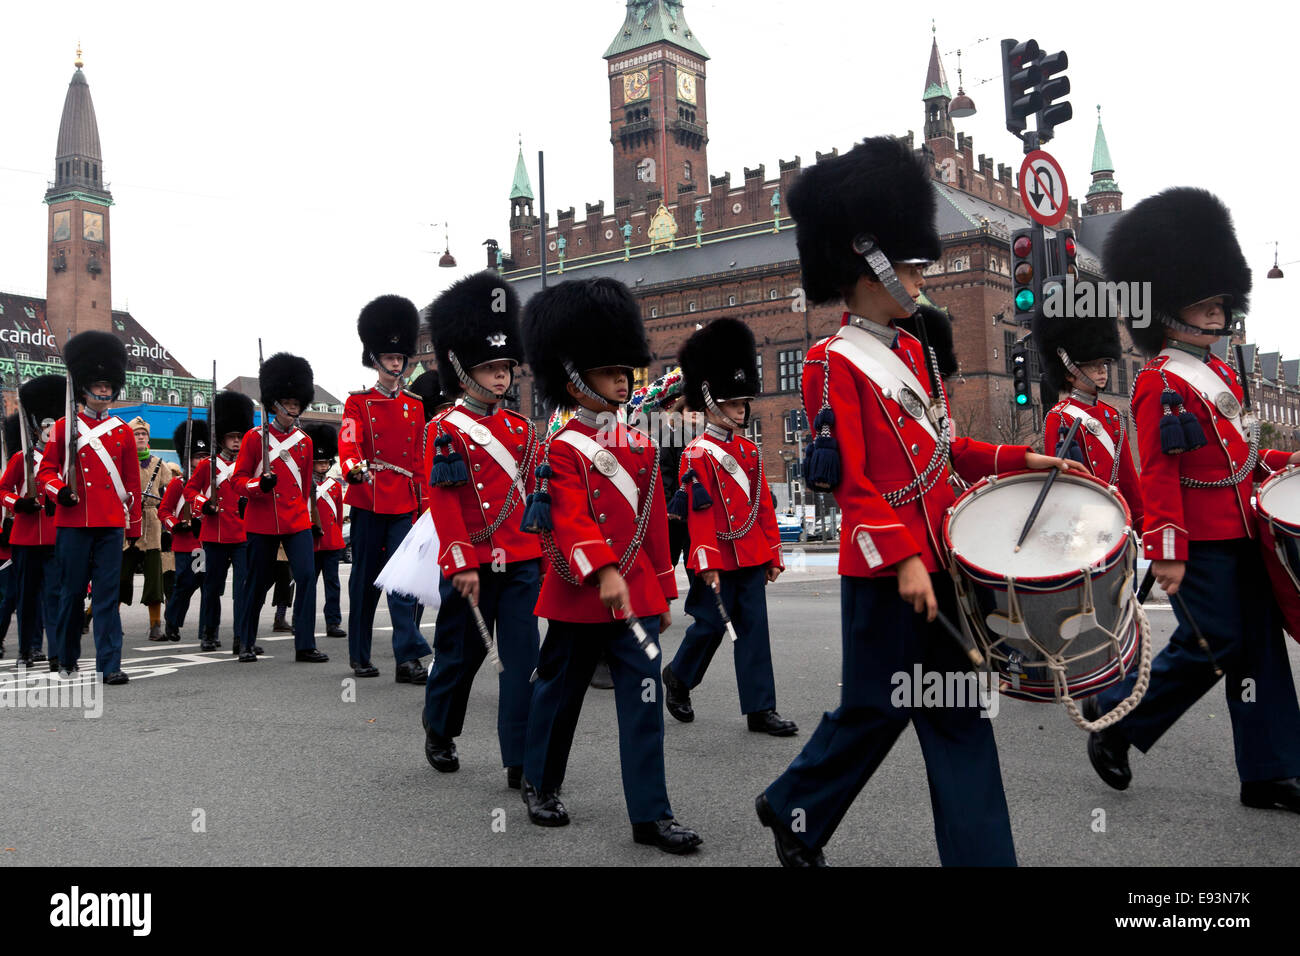 Copenhagen, Denmark. 18th Oct, 2014. Tivoli Buys band march through the city of Copenhagen in celebration of Halloween. Here pictured with the City Hall in the background. Credit:  OJPHOTOS/Alamy Live News Stock Photo